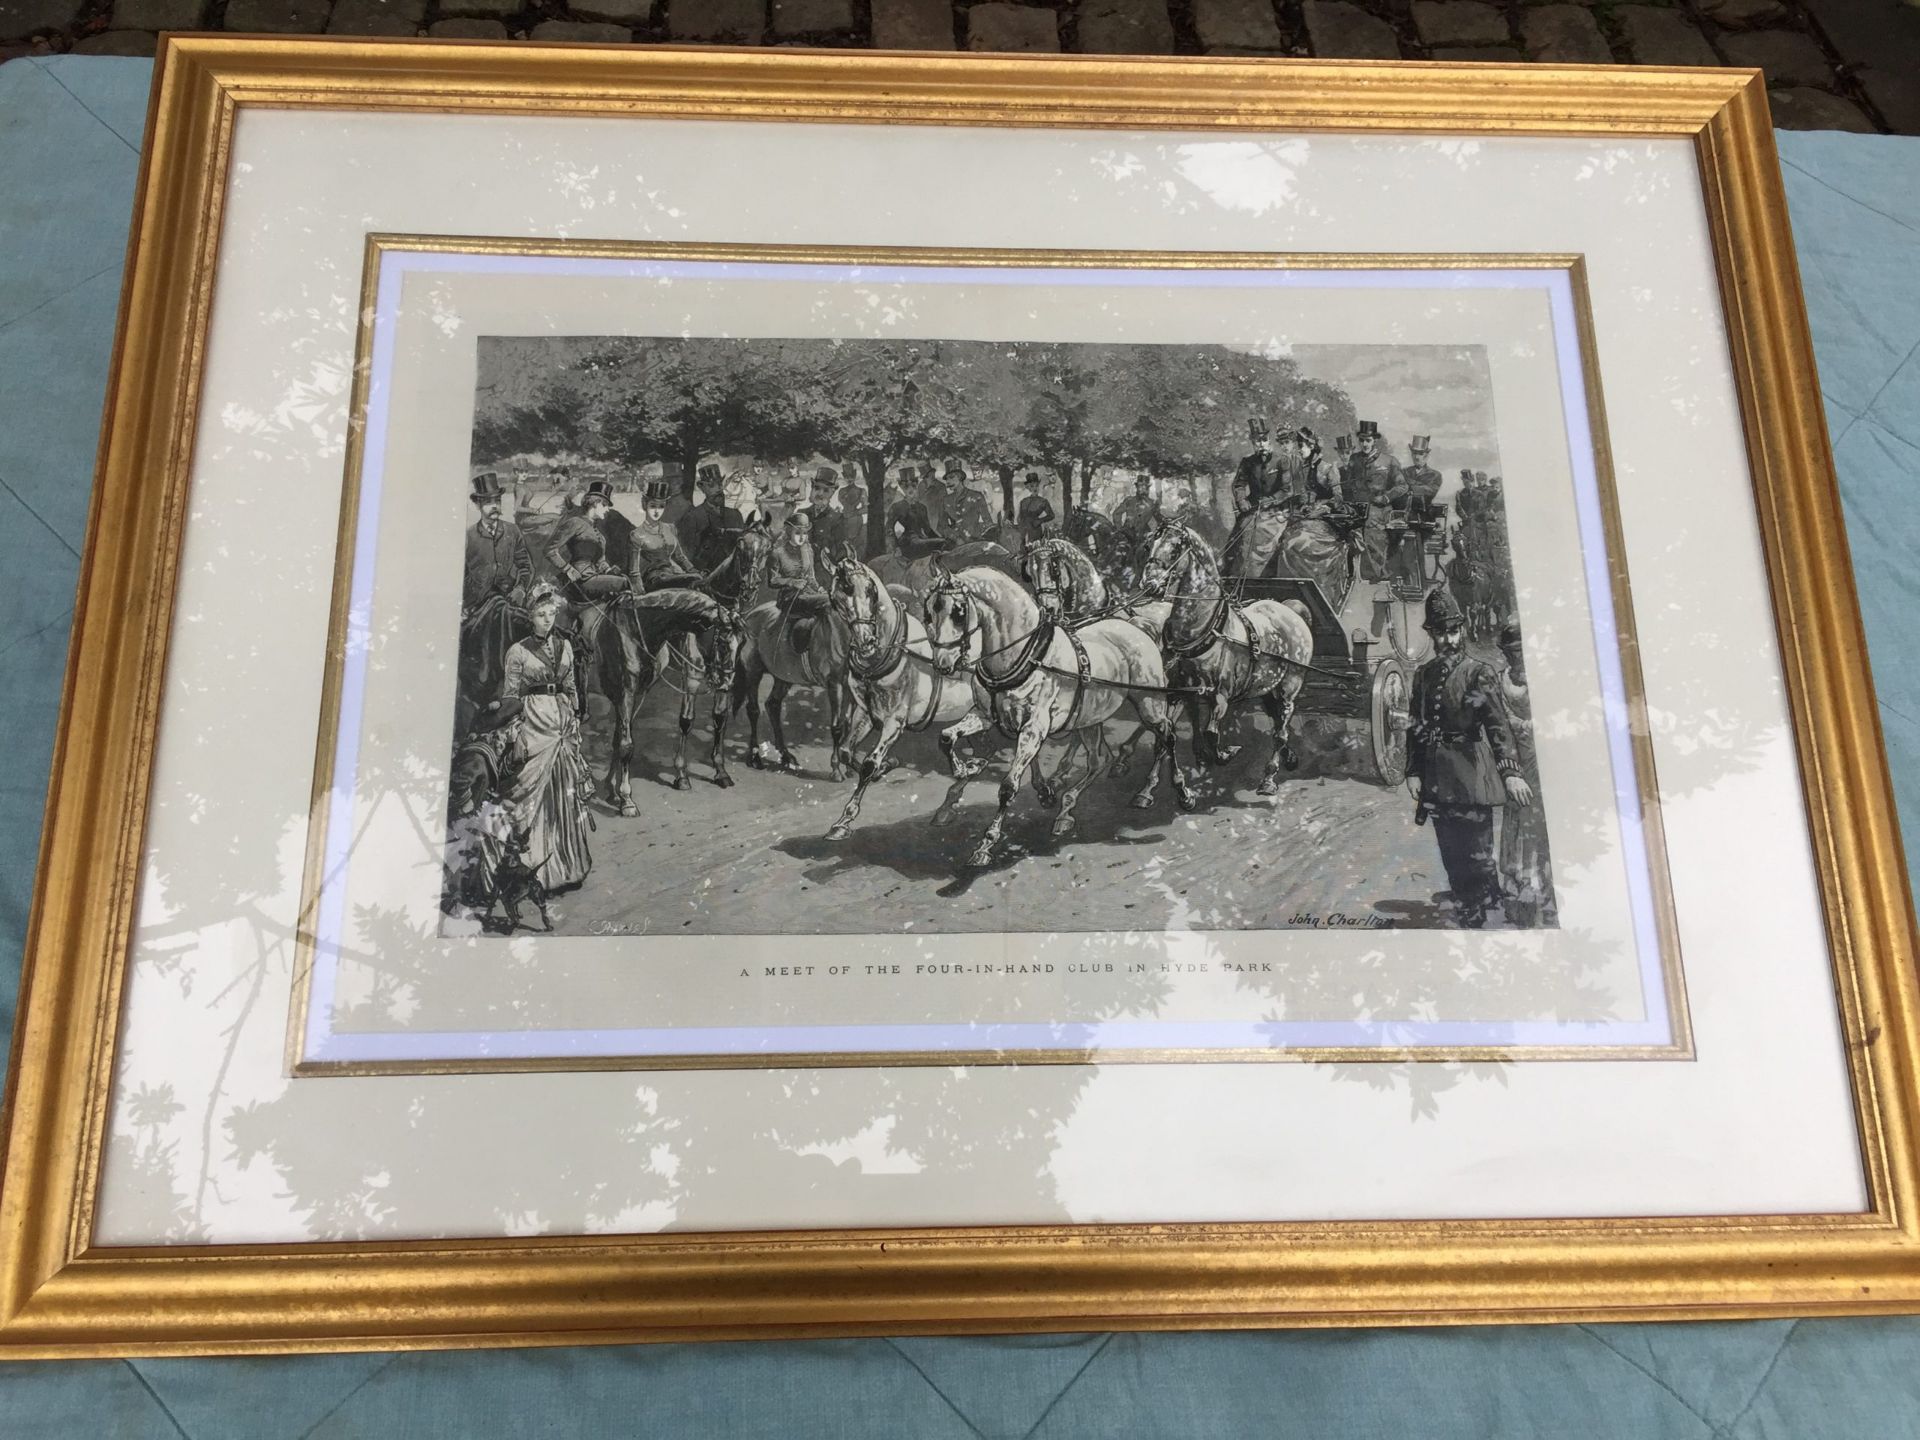 Framed and glazed engraving 'A meet of the four-in-hand Club in Hyde Park' by John Charlton, 1887